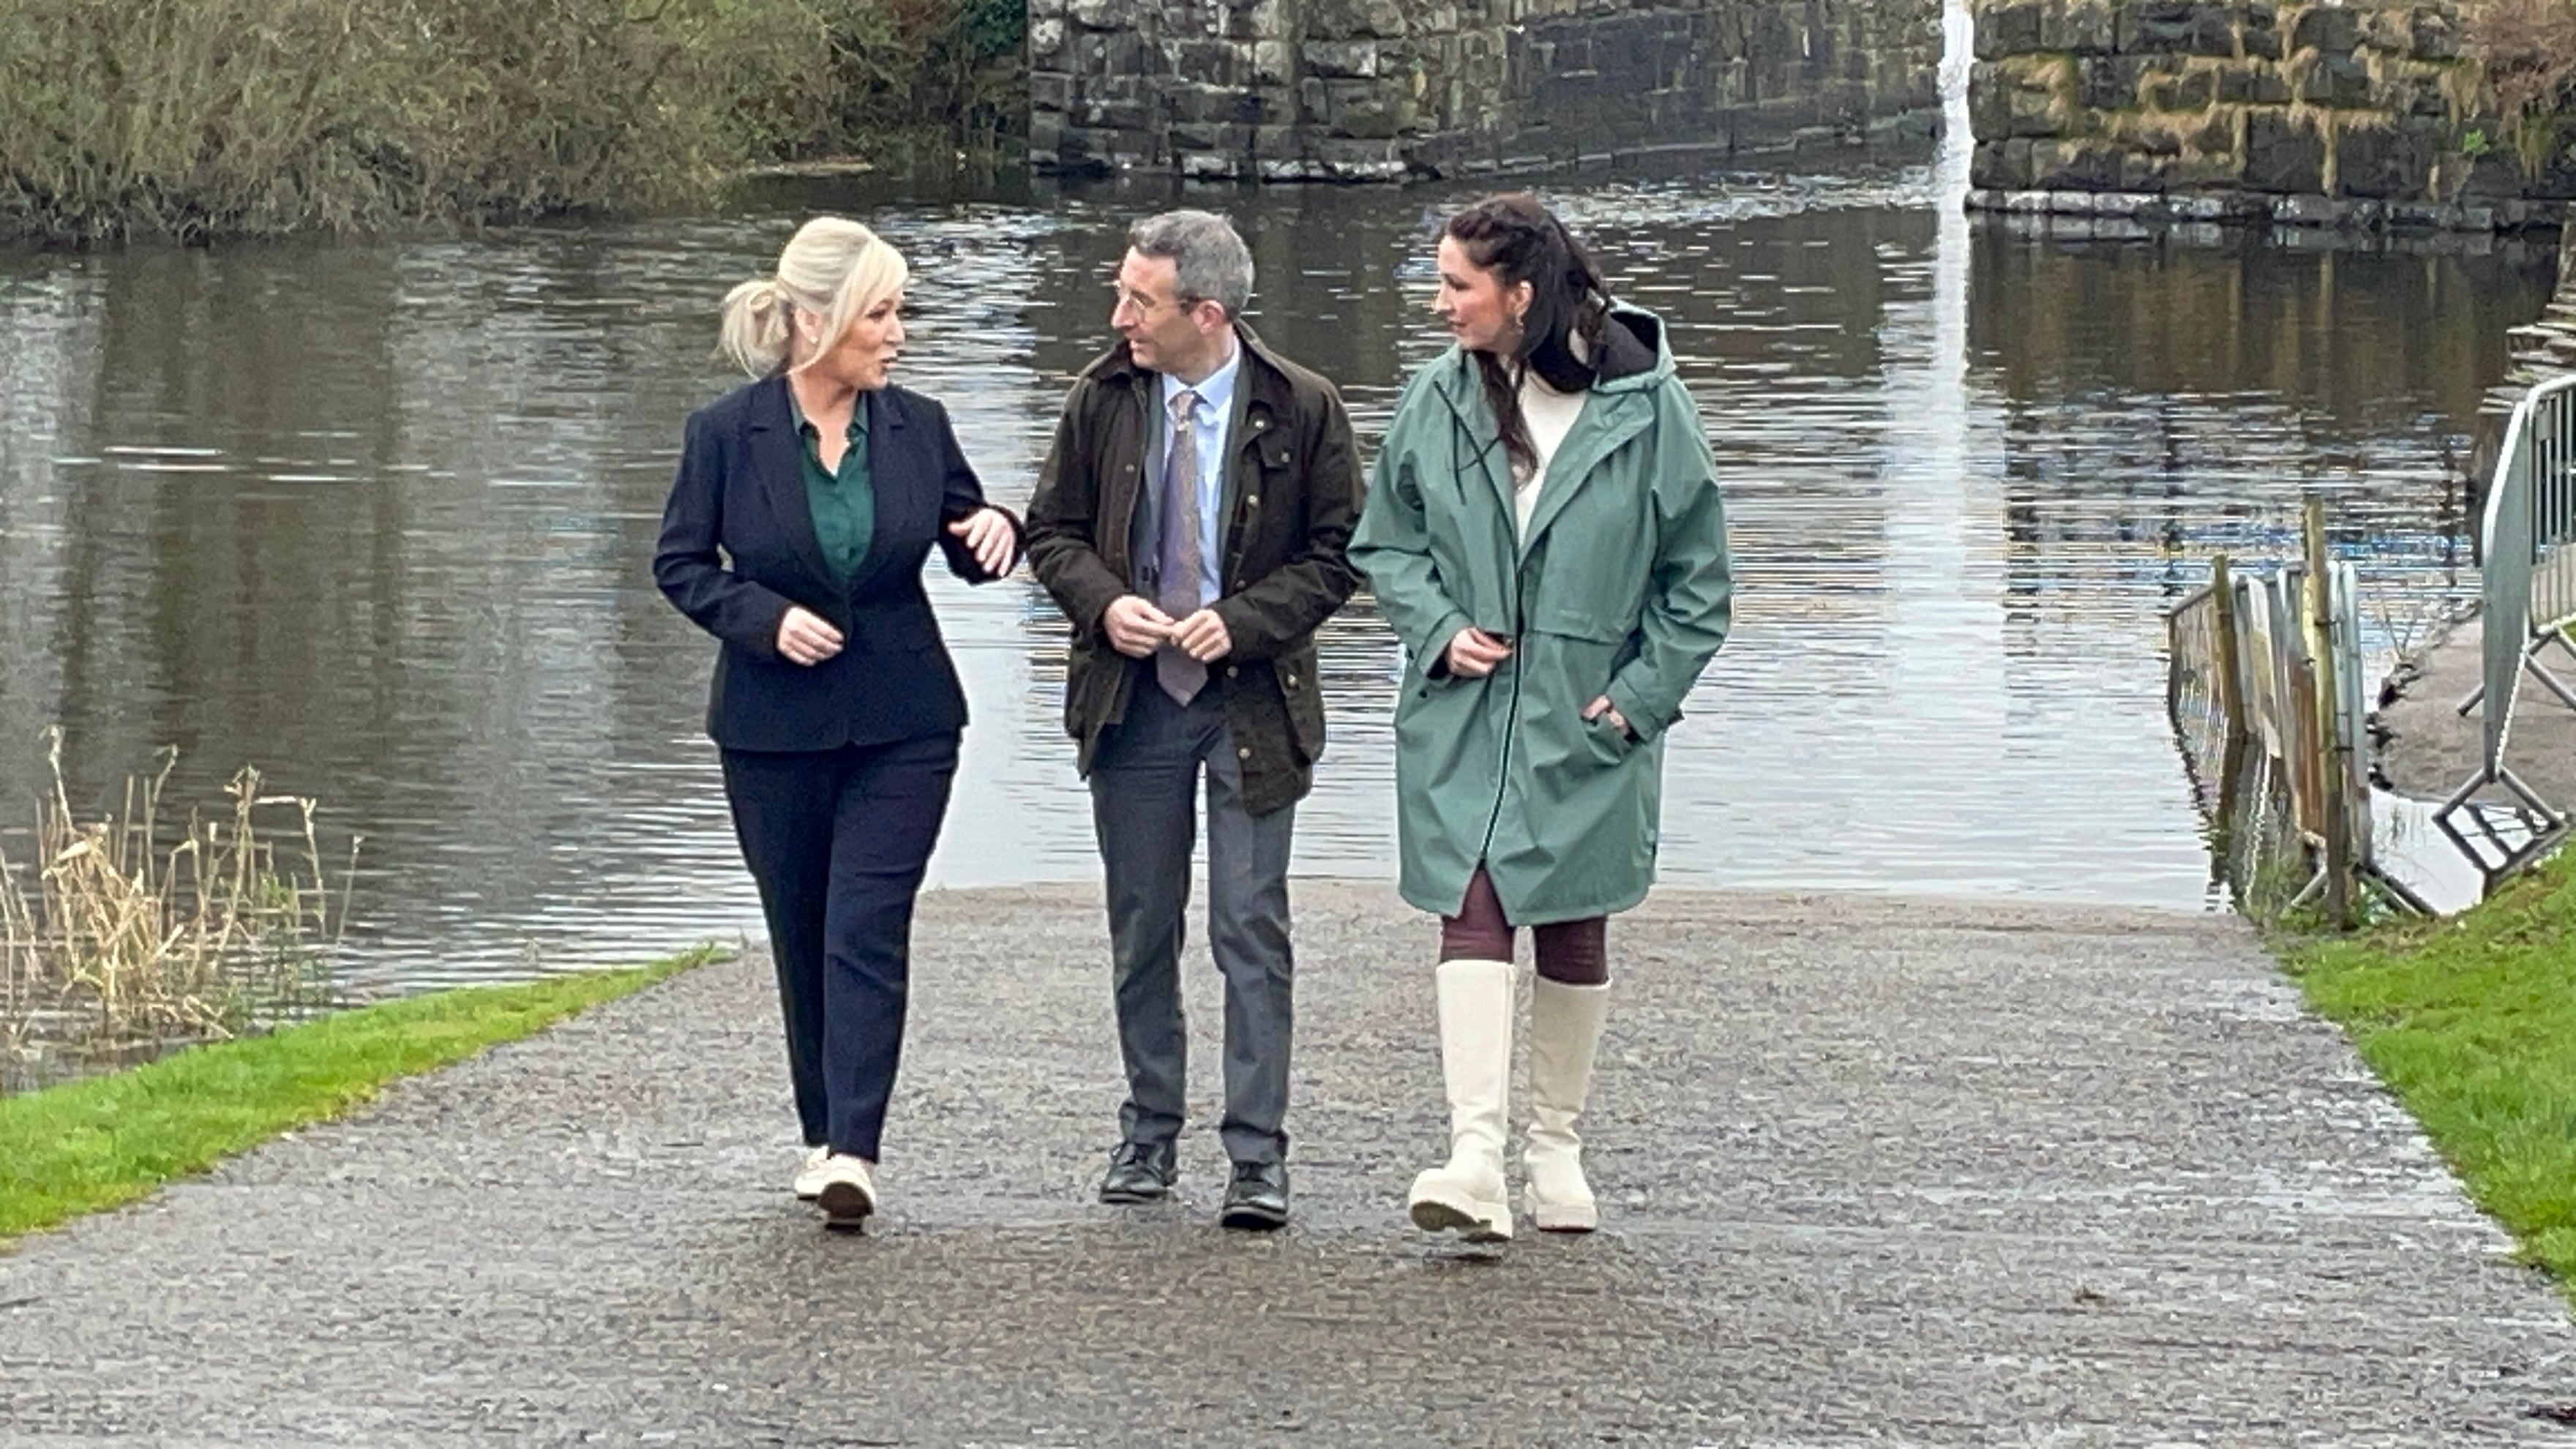 Agriculture Minister Andrew Muir pictured with First Minister Michelle O'Neill (left) and Deputy First Minister Emma Little-Pengelly at the edge of Lough Neagh